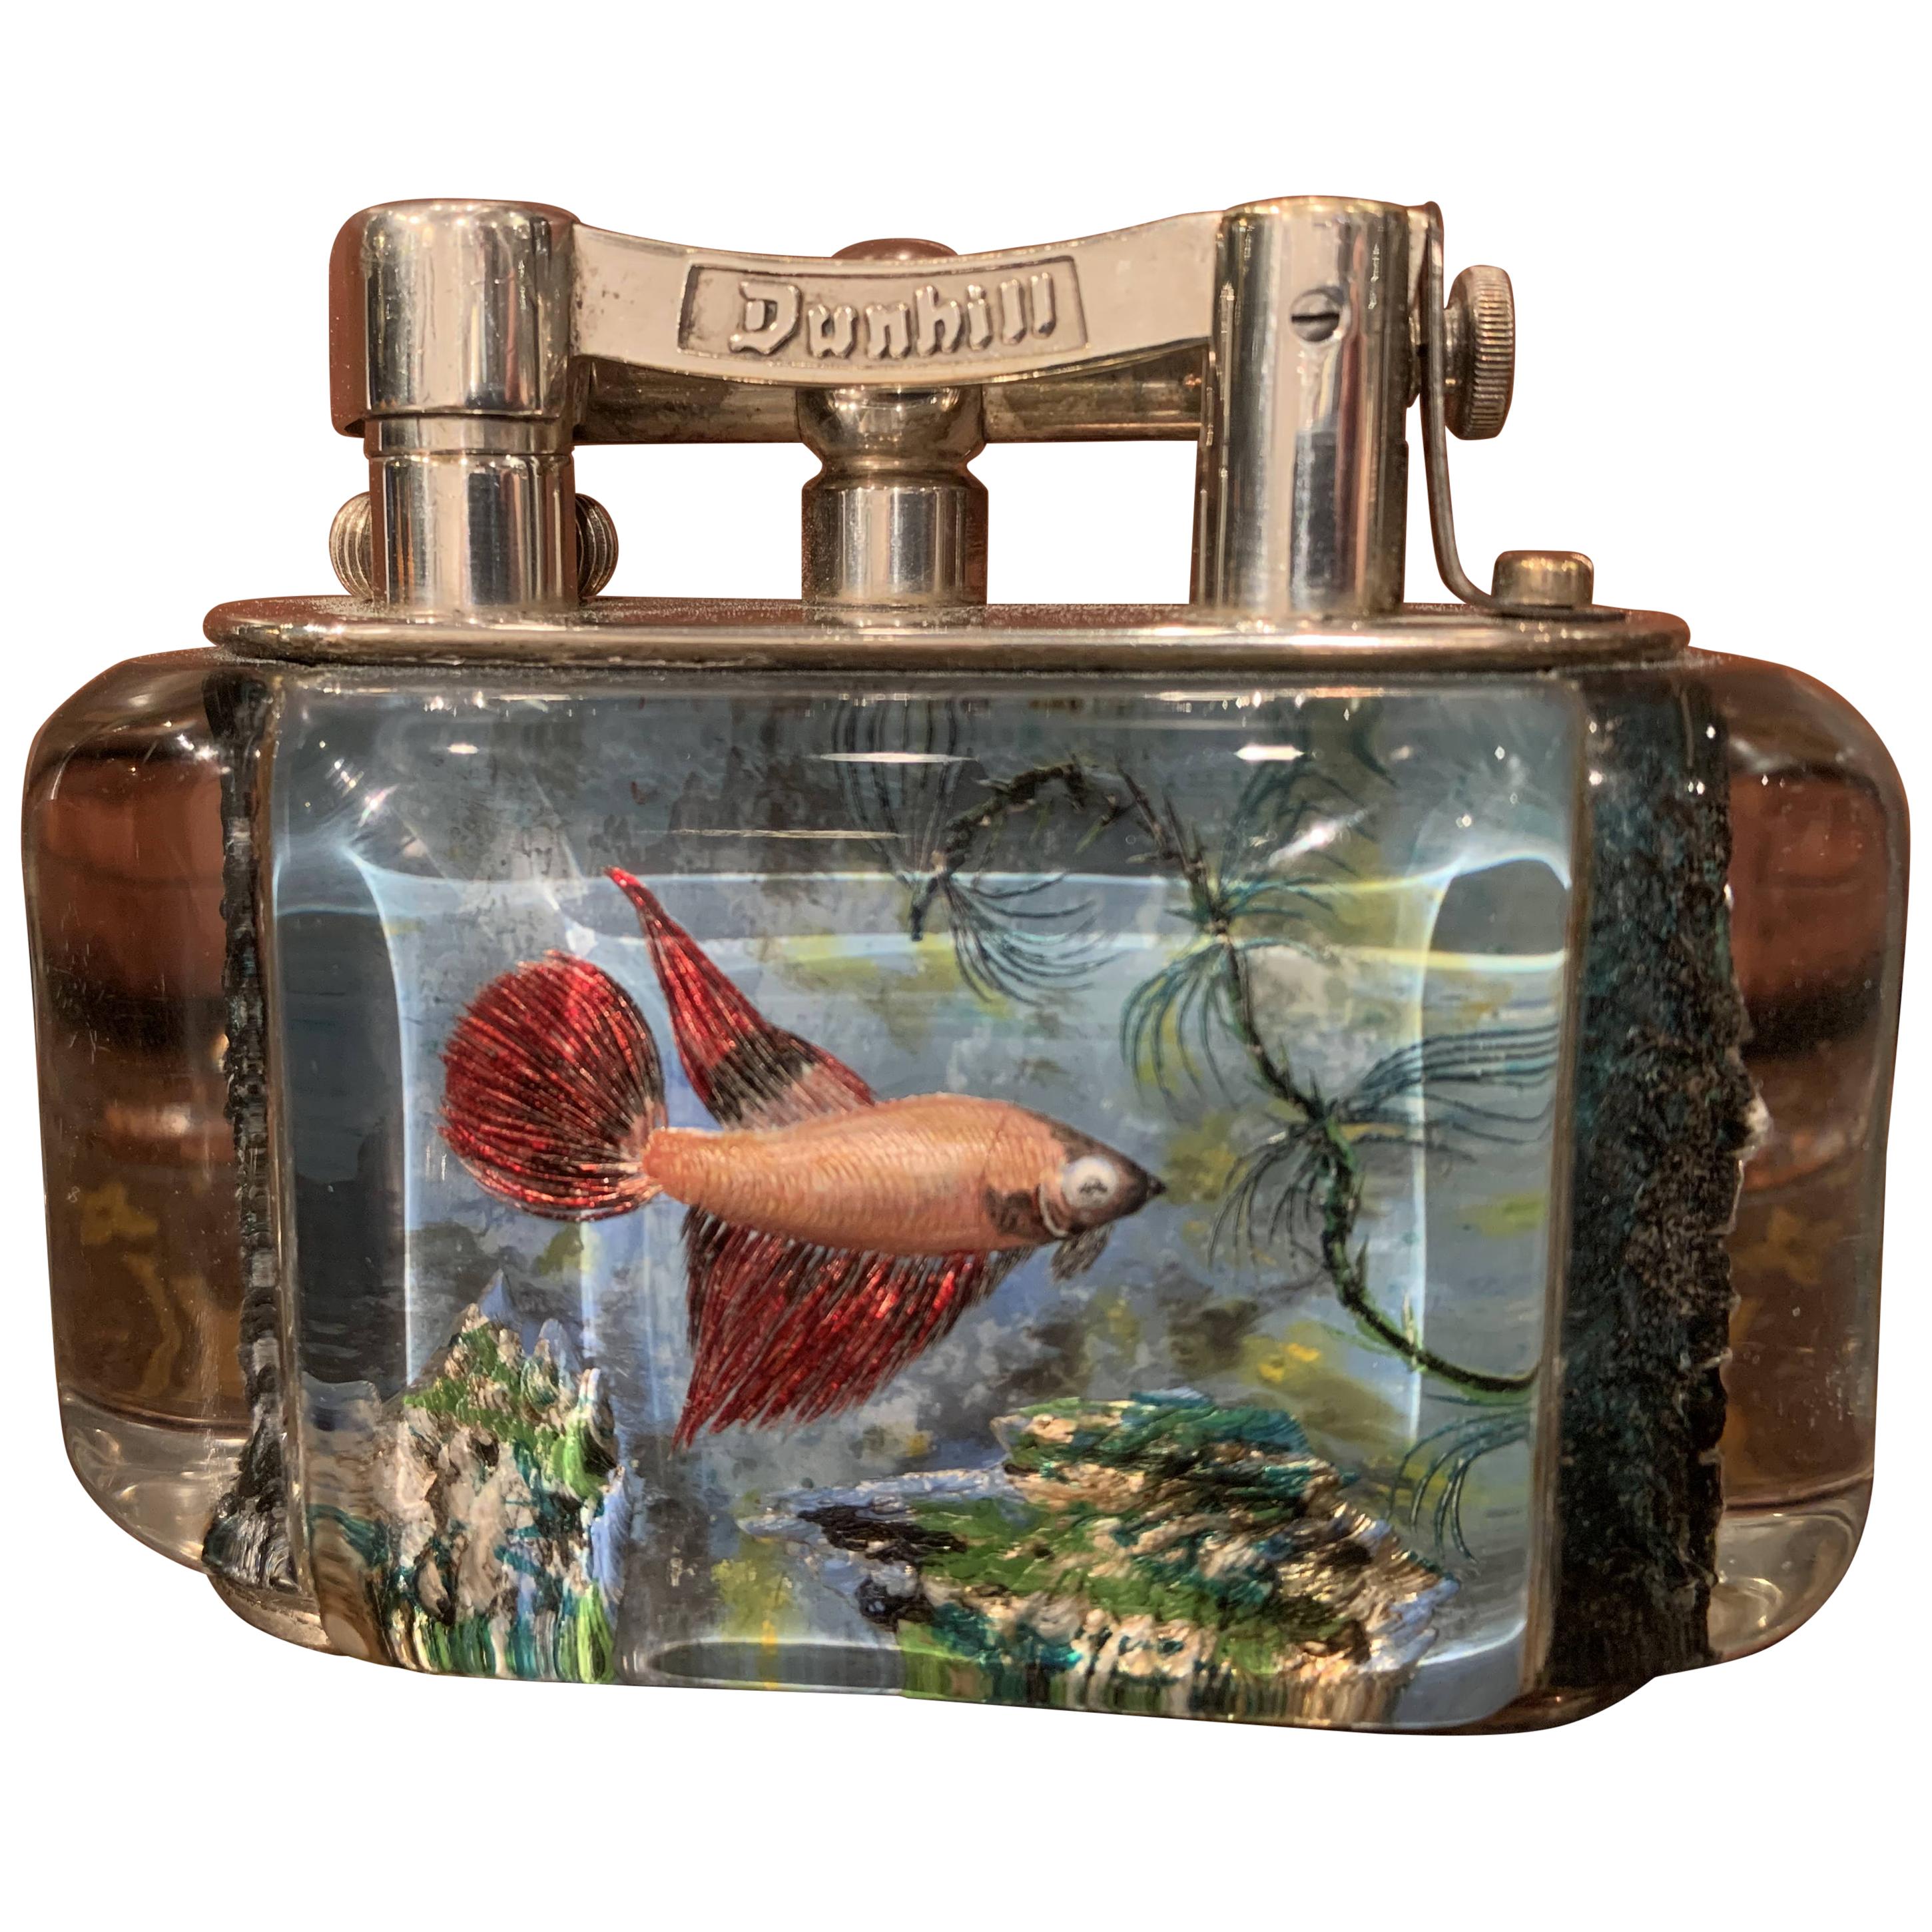 Rare 1950s Dunhill Aquarium Half-Giant Lighter, Silver Plated, Made in England